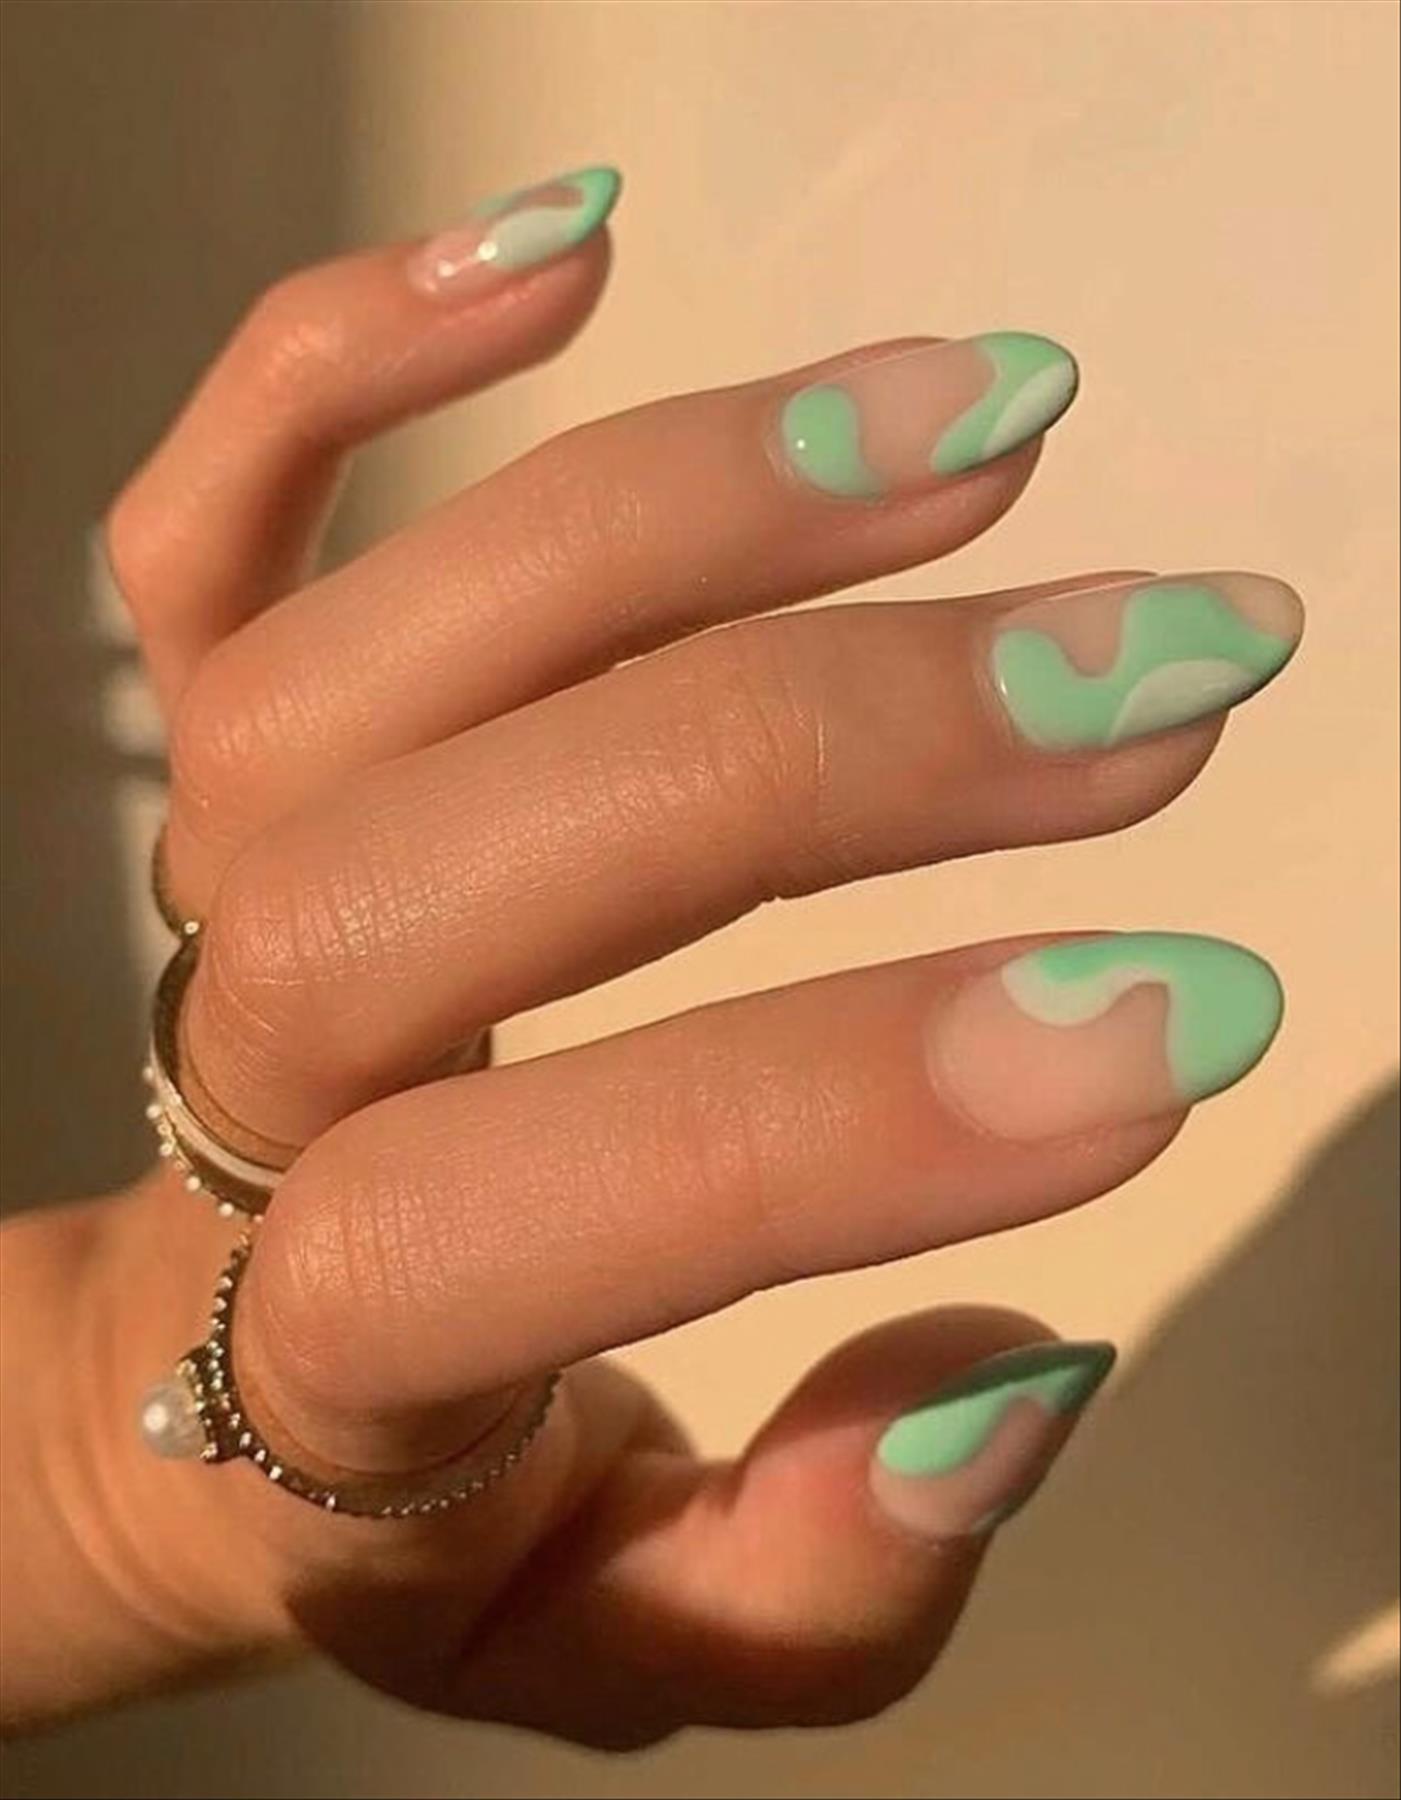 Chic St. Patrick's Day Nail Art Designs for 2022